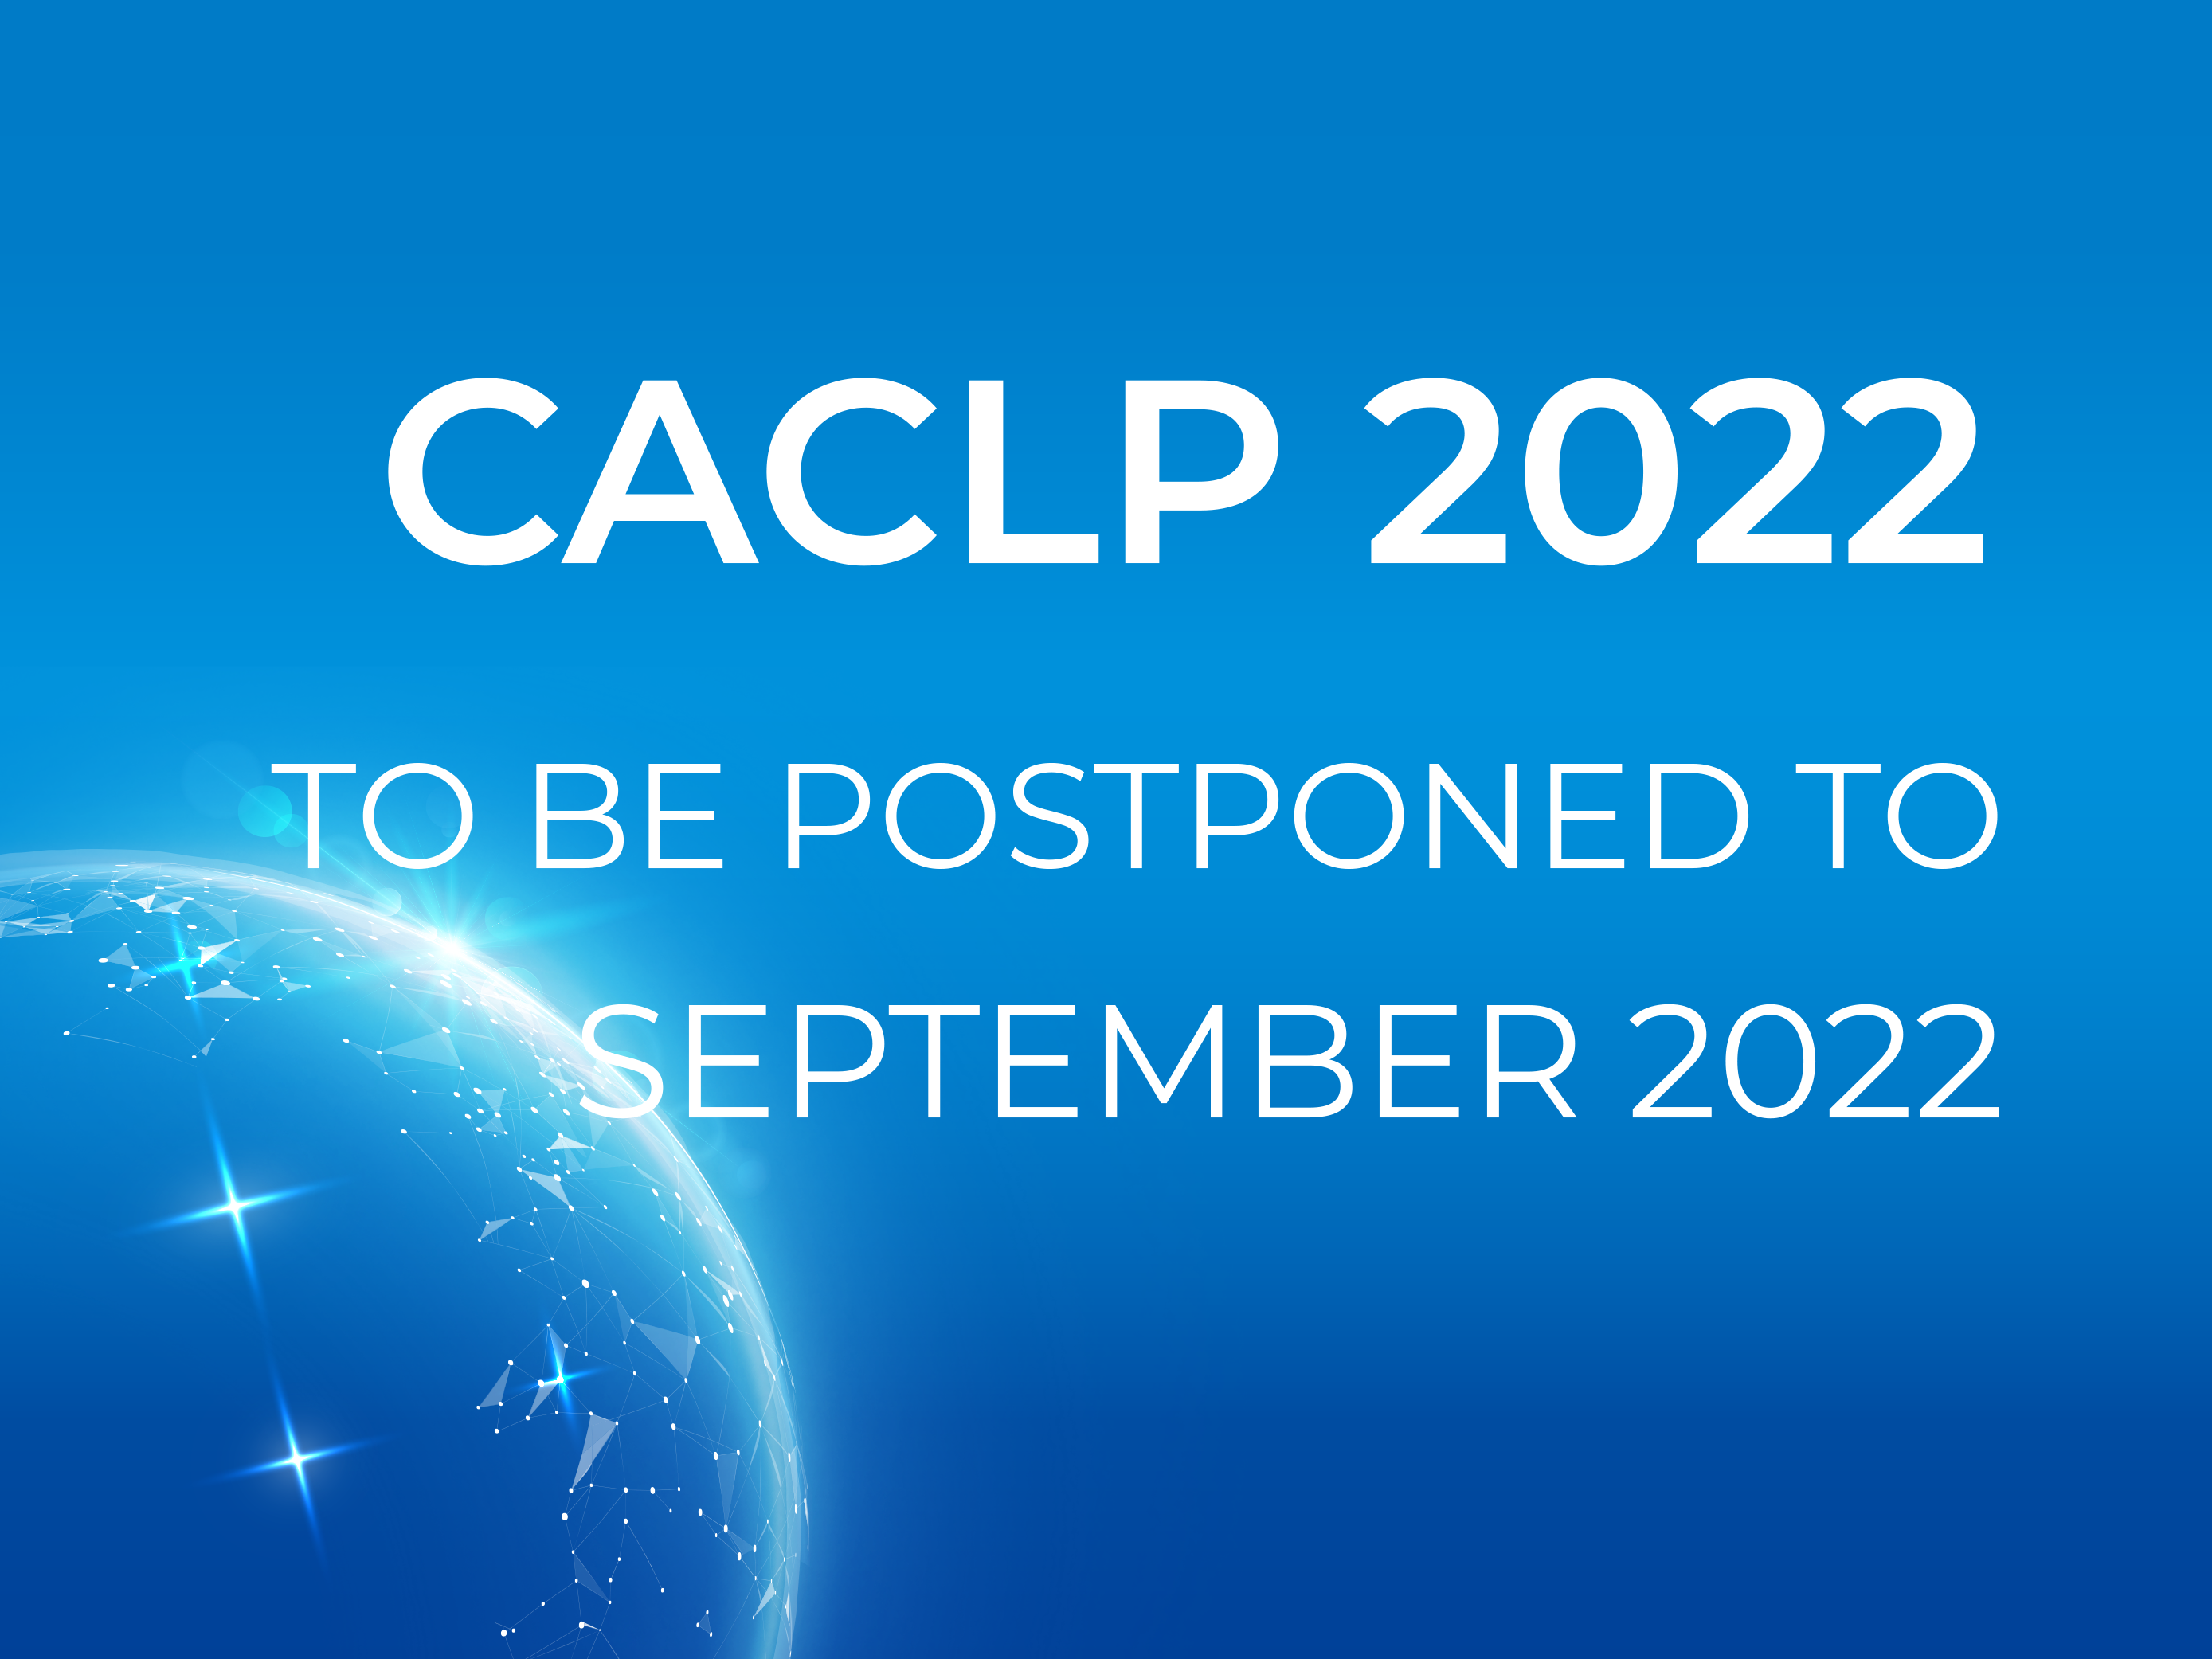 CACLP 2022 TO BE POSTPONED AGAIN TO SEPTEMBER 2022